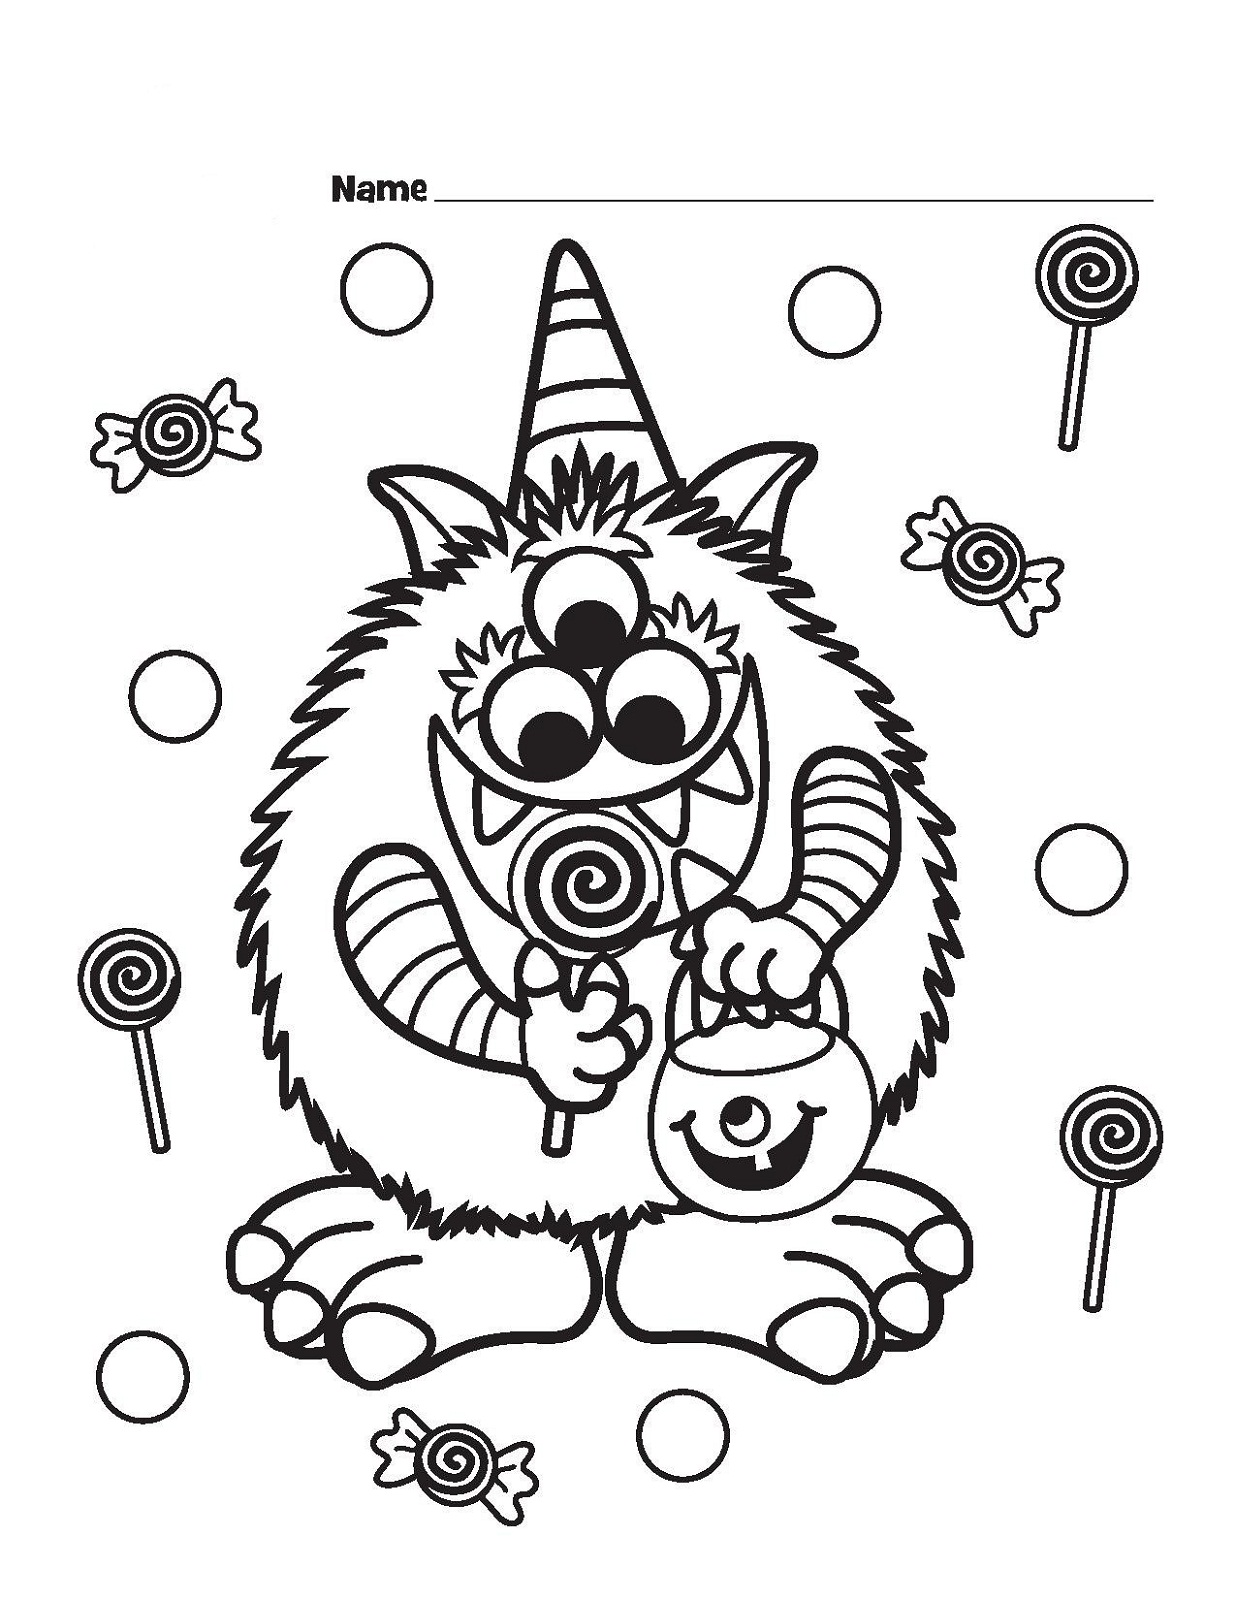 Candyland Coloring Pages for Kids | Activity Shelter